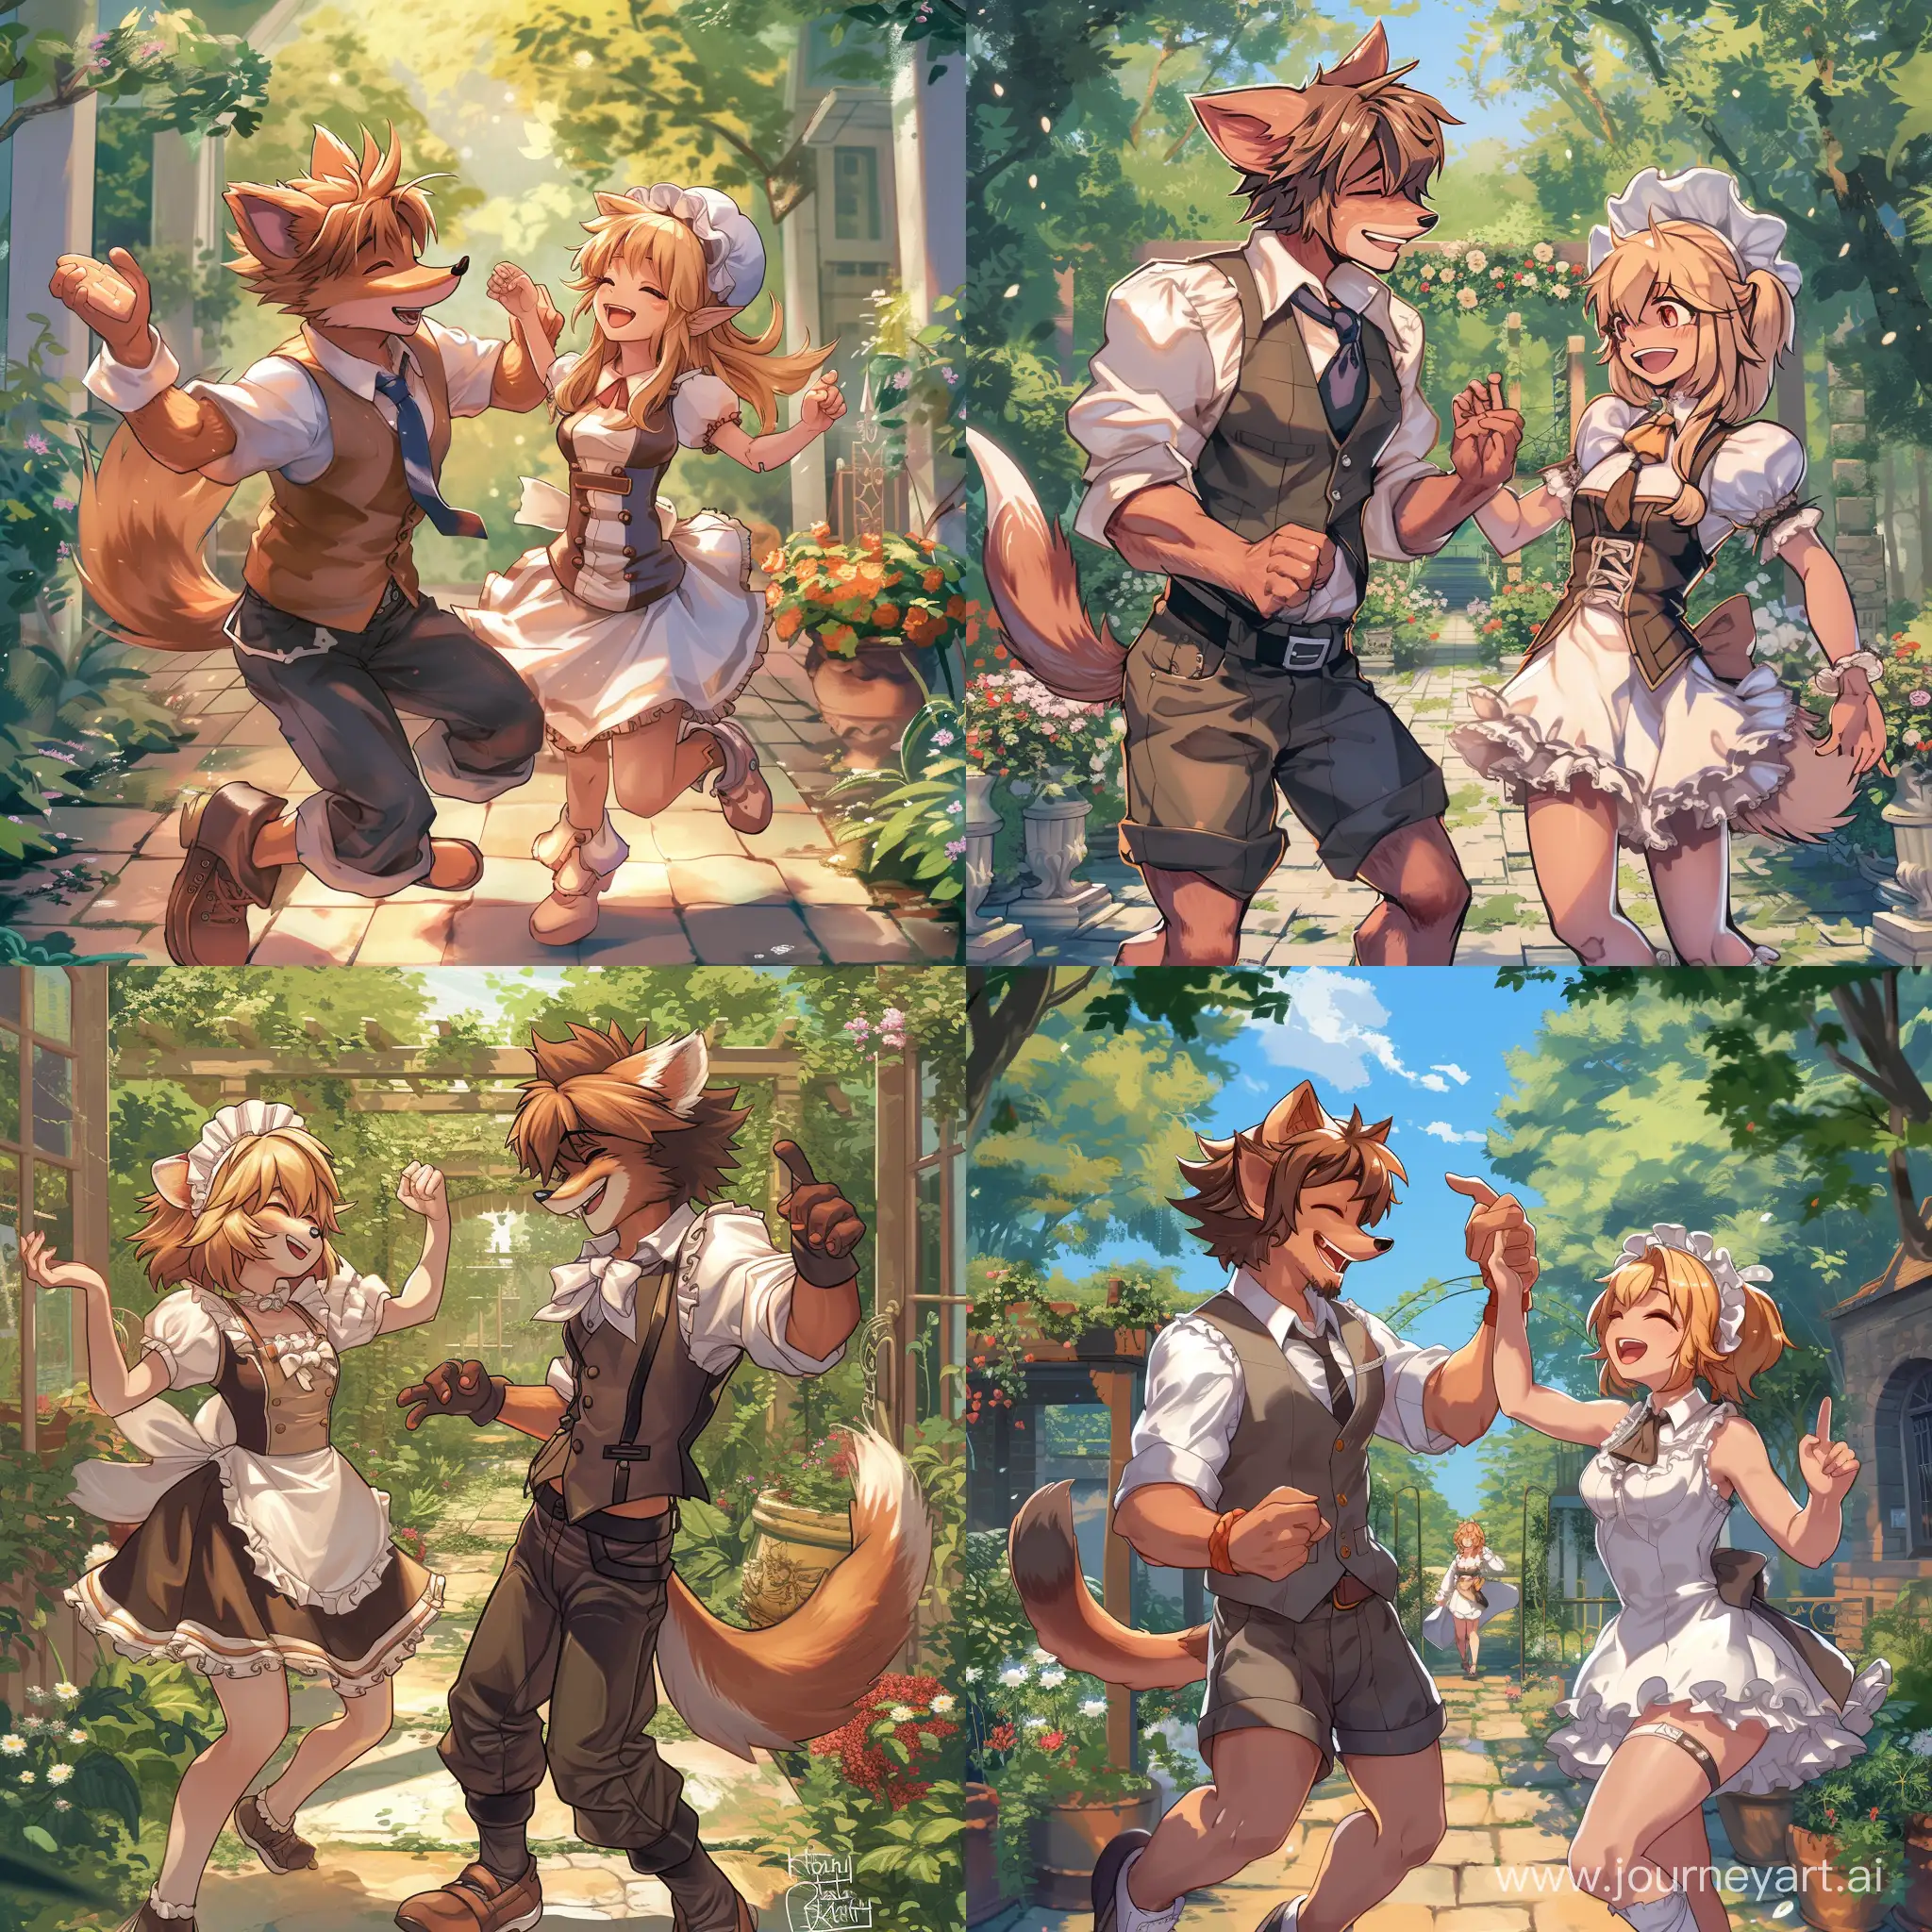 Furry-Bandicoot-Young-Man-and-Maid-Dancing-in-Garden